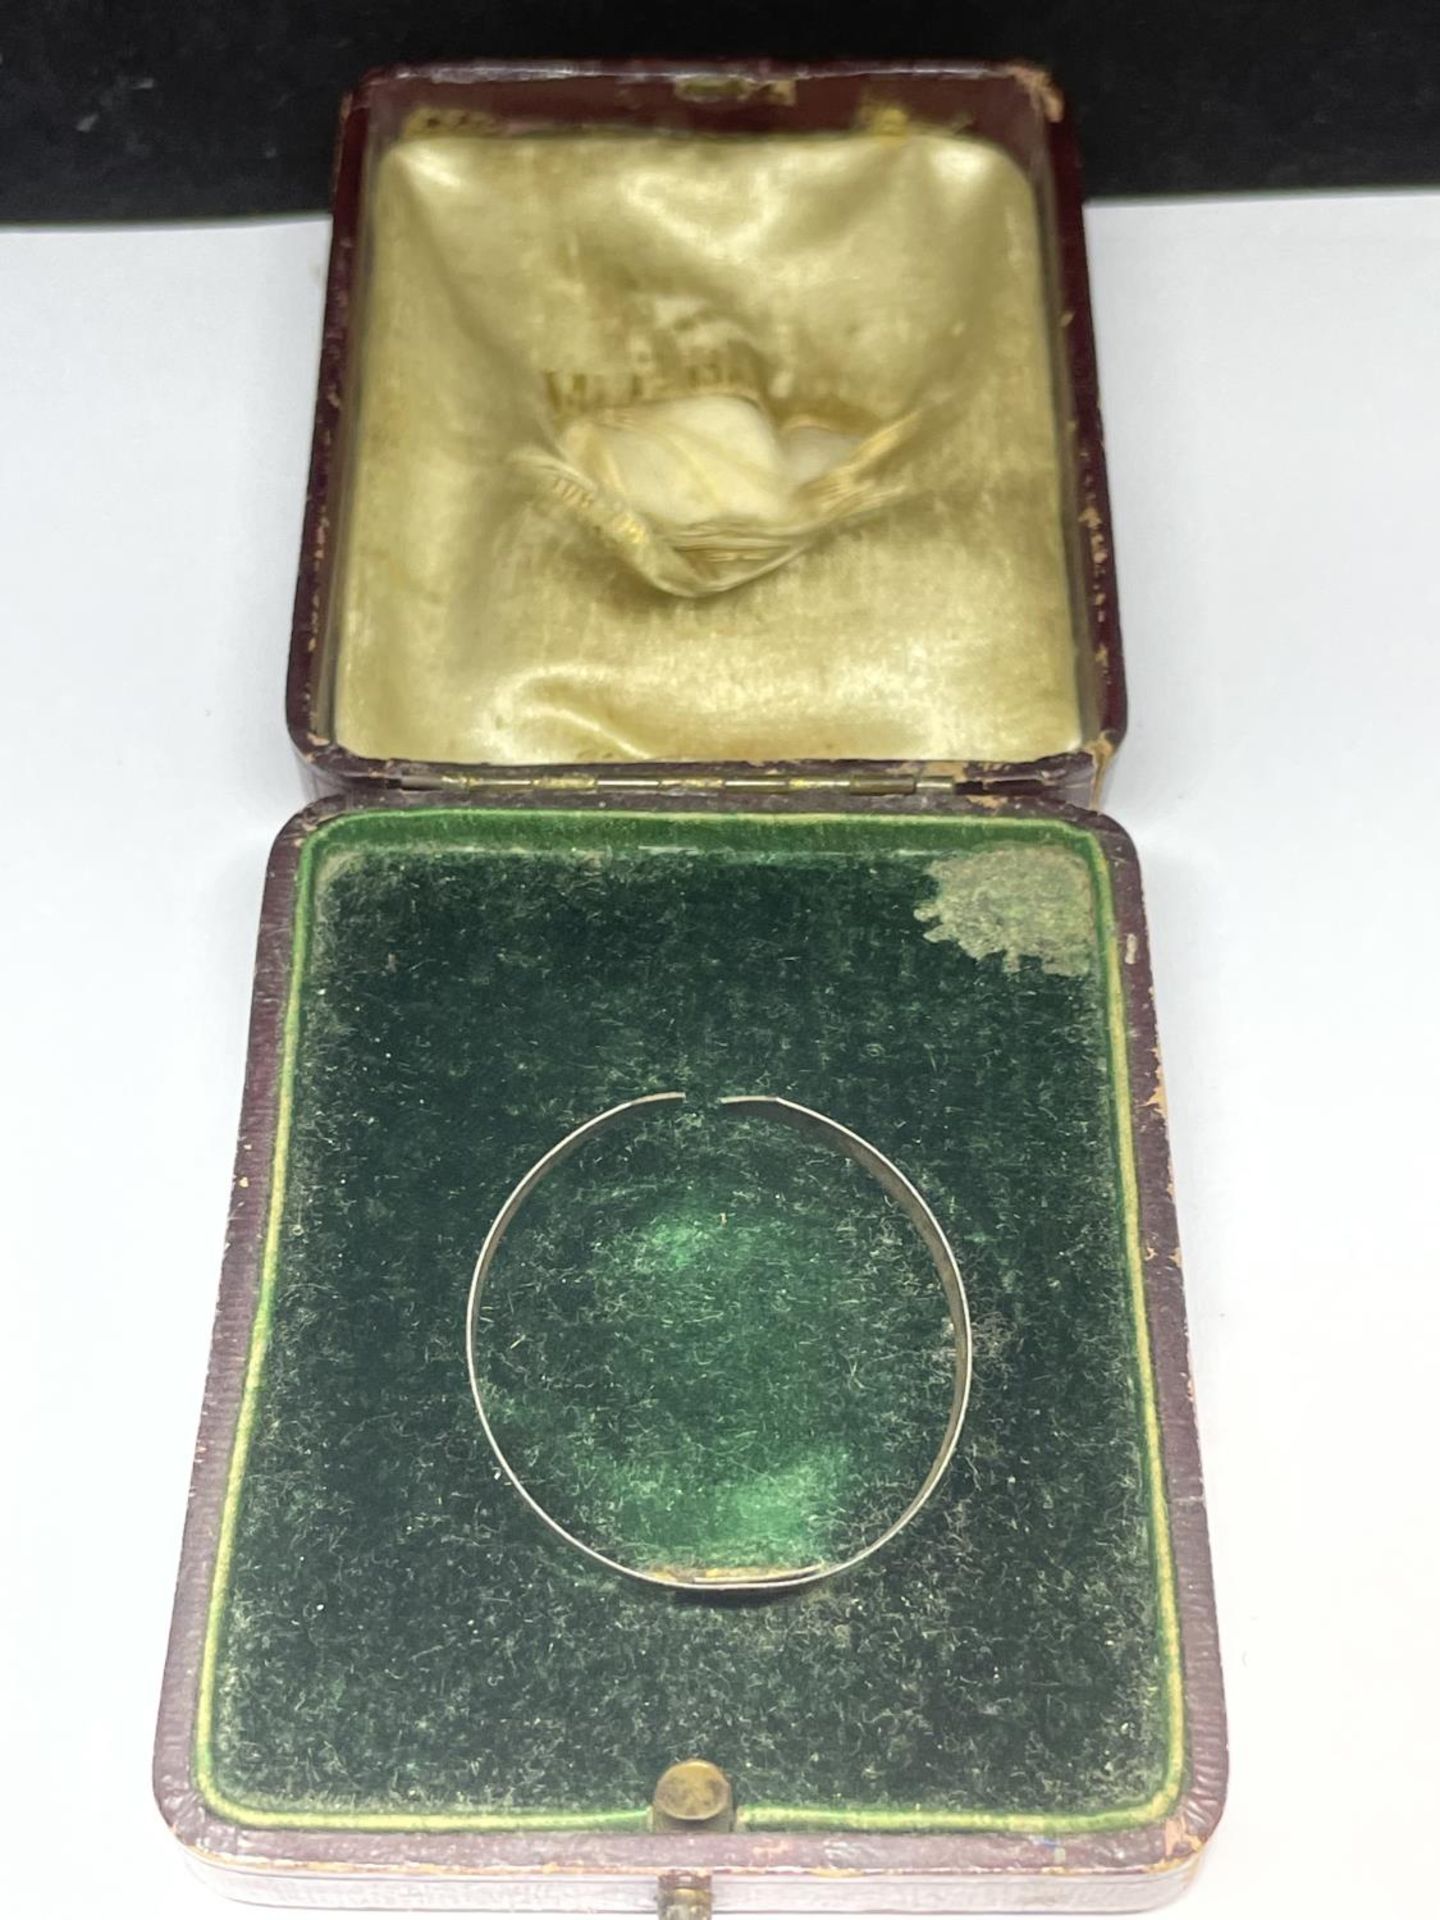 AN 18CT GOLD TOP WIND POCKET WATCH WITH WHITE ENAMELLED DIAL AND GOLD HANDS, WITH ORIGINAL BOX - Image 7 of 7